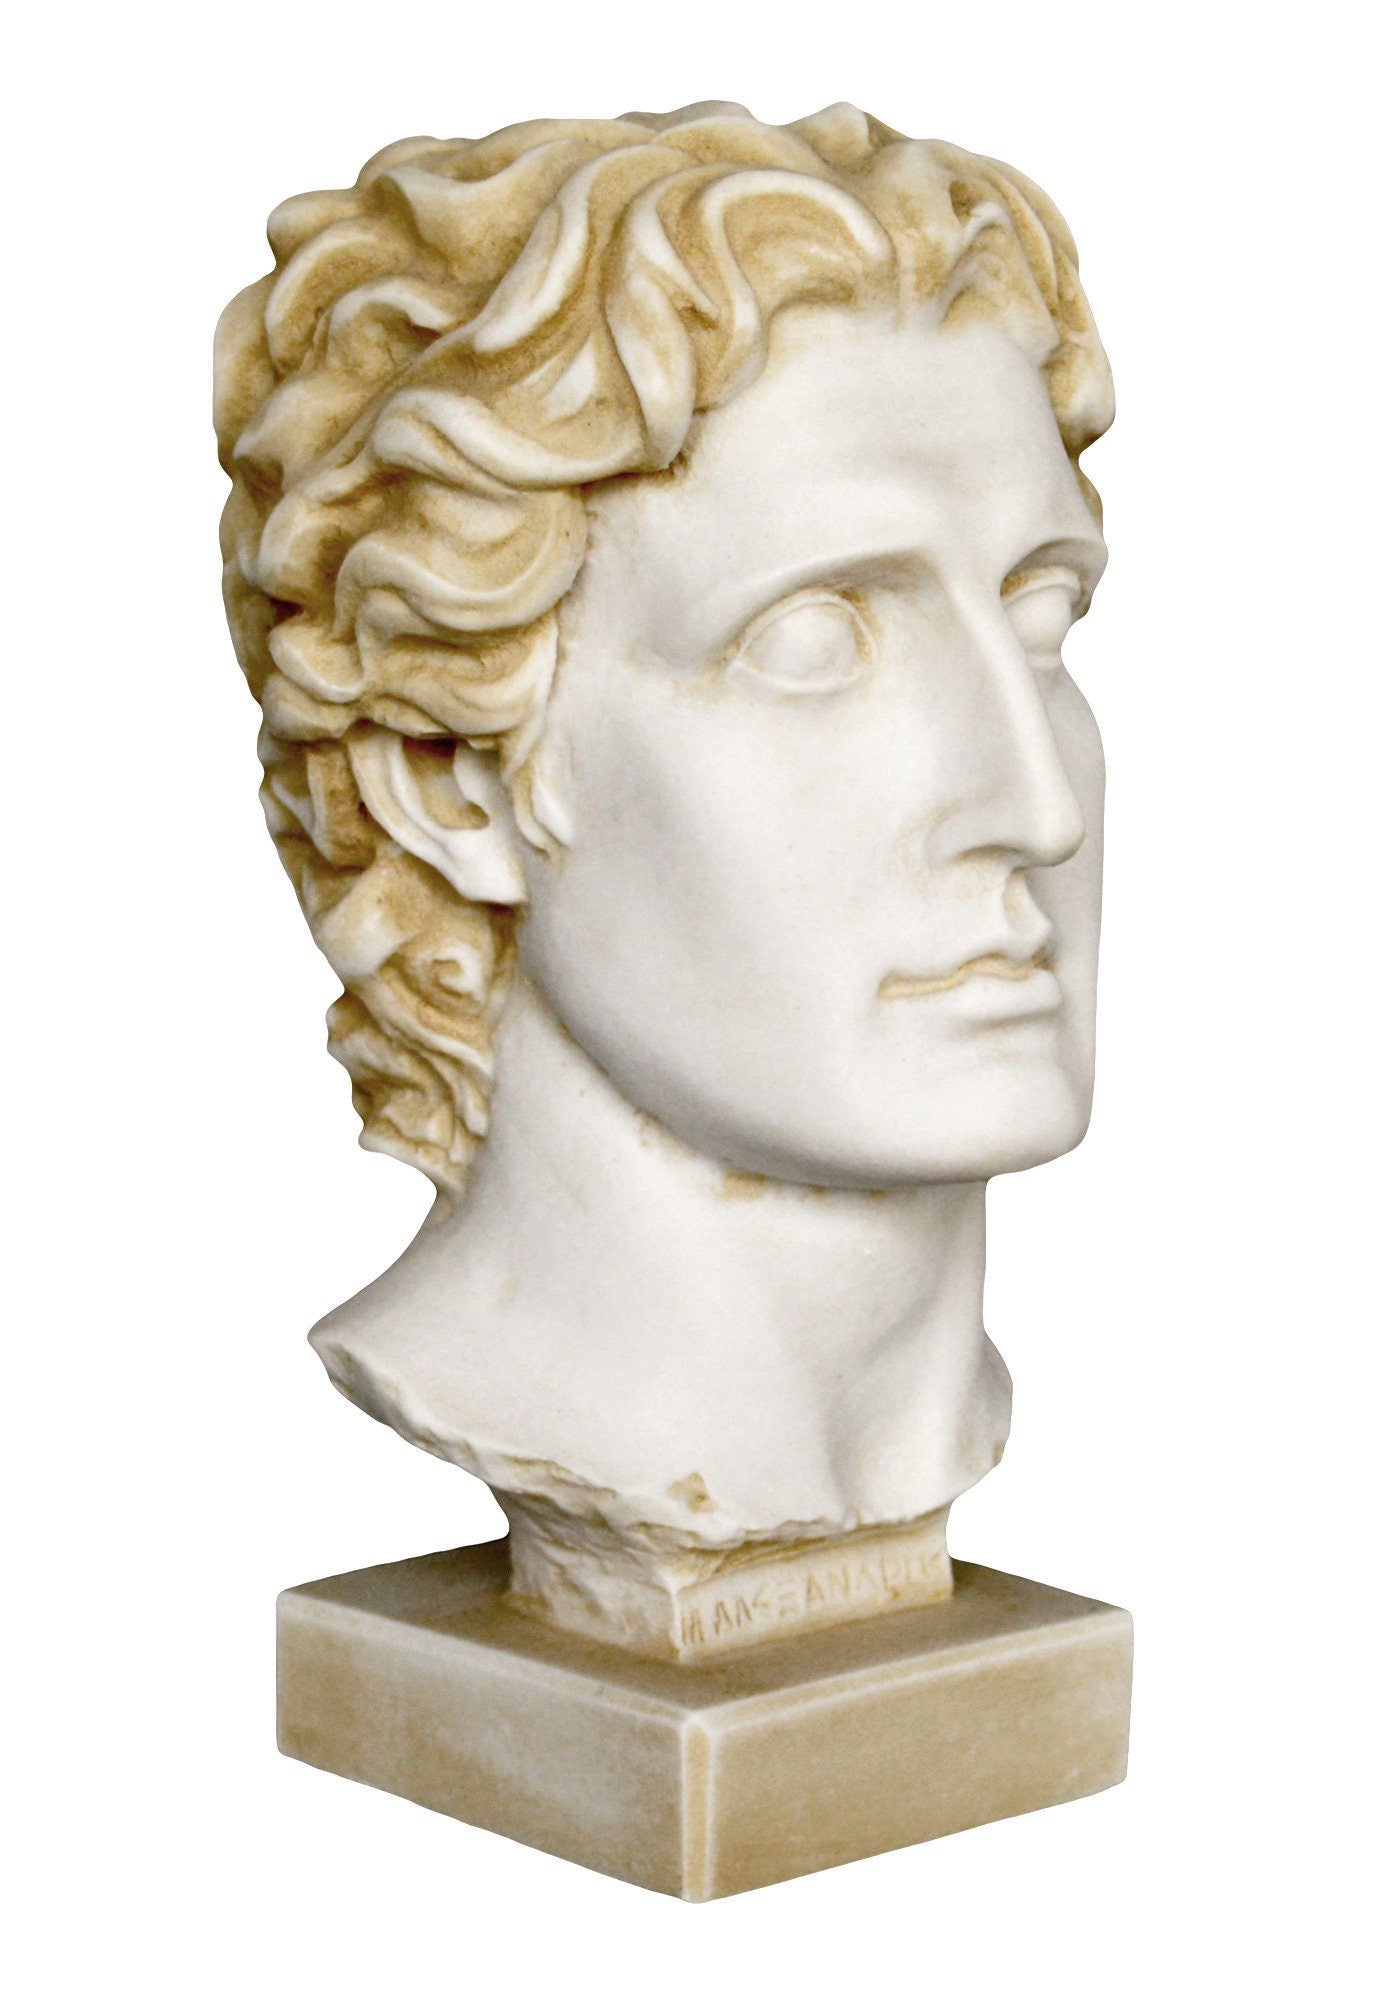 Alexander the Great Bust - King of Macedonia - 356–323 BC - Son of Philip - Visionary Leader - Aged Alabaster Sculpture